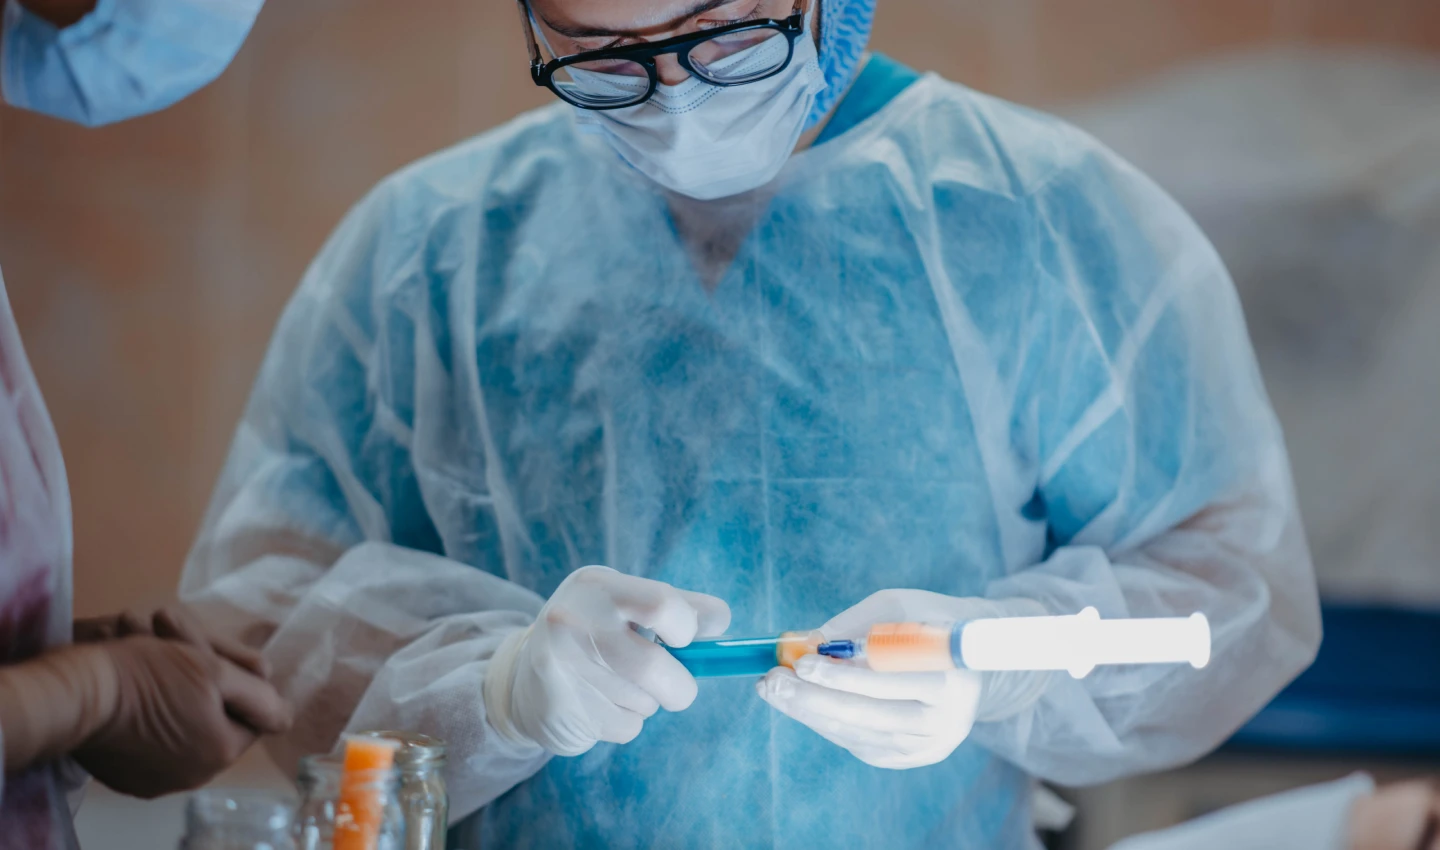 Image of a doctor holding an implant instrument, emphasizing the importance of choosing an experienced hair transplant surgeon for successful hair restoration surgery.